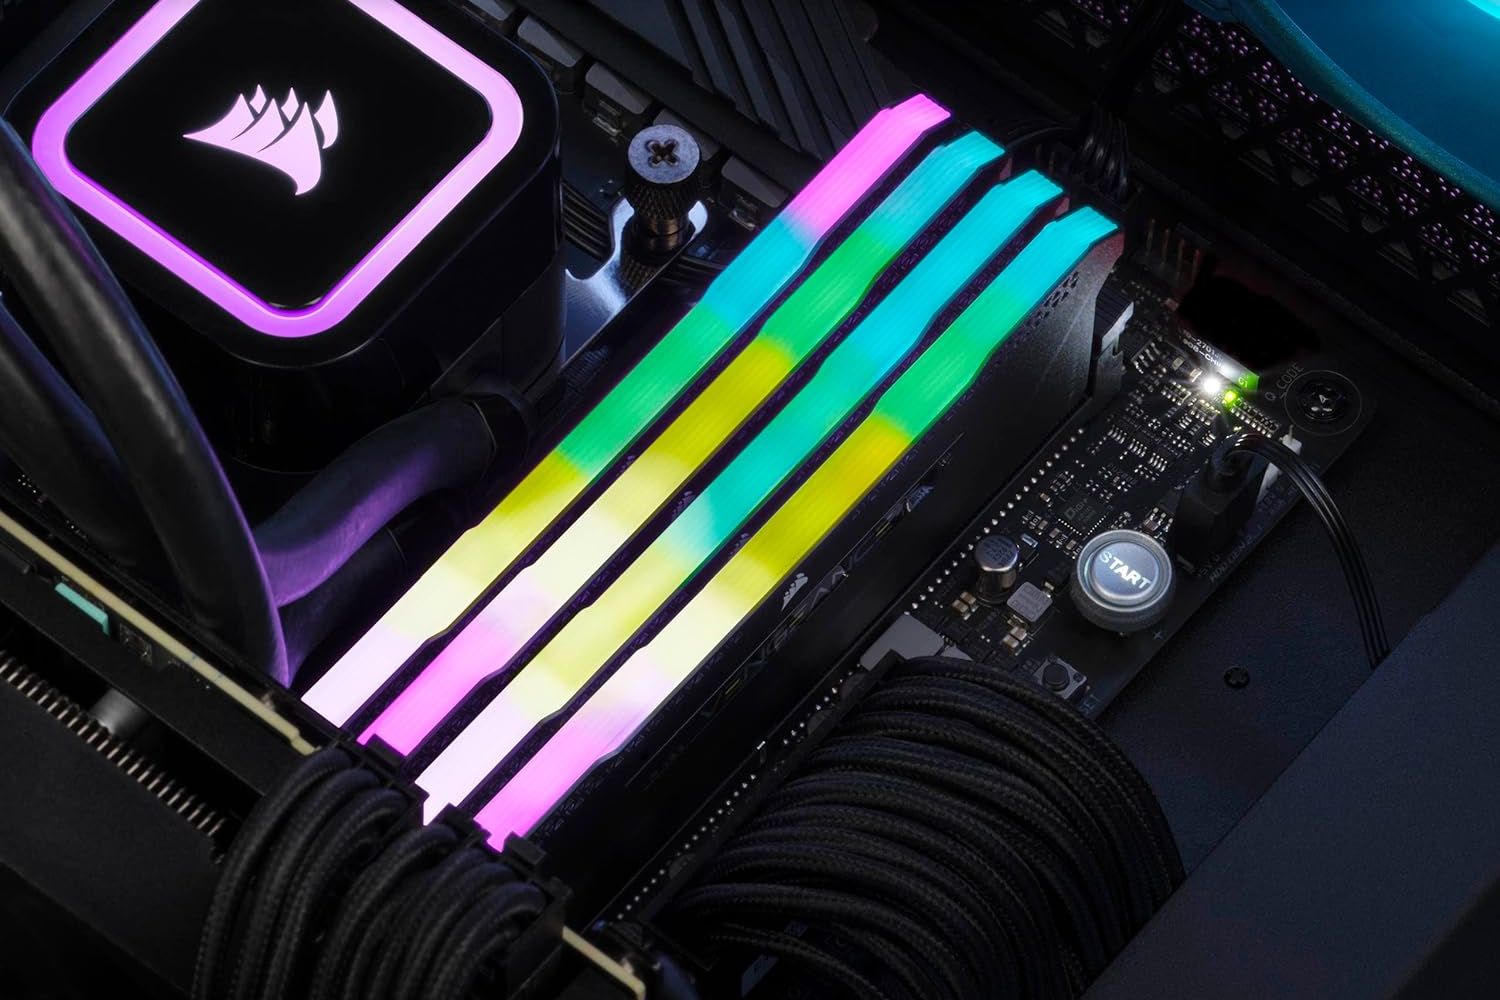 Close up of RGB RAM modules on motherboard